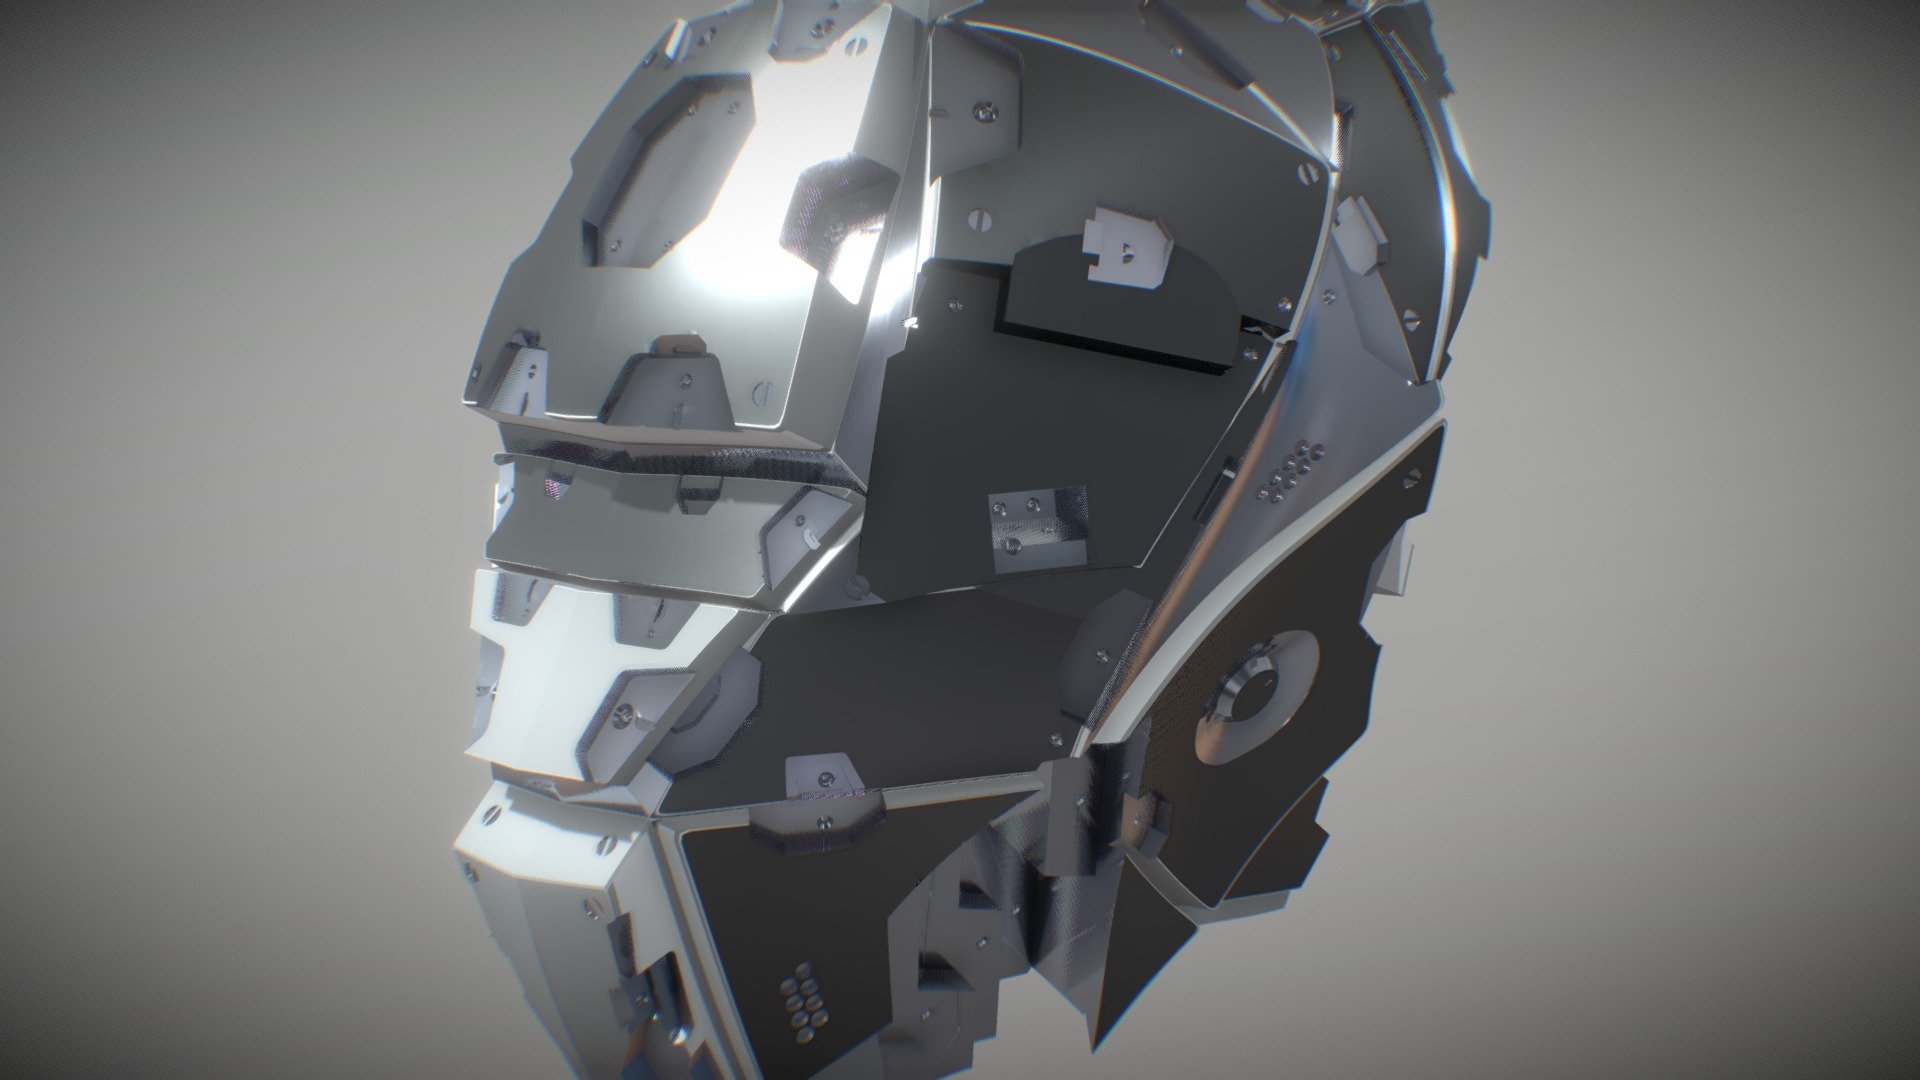 Zbrush process starting with Low poly model and panel loops and finishing with live booleans to give it a sci-fi, high tech sort of feeling 3d model